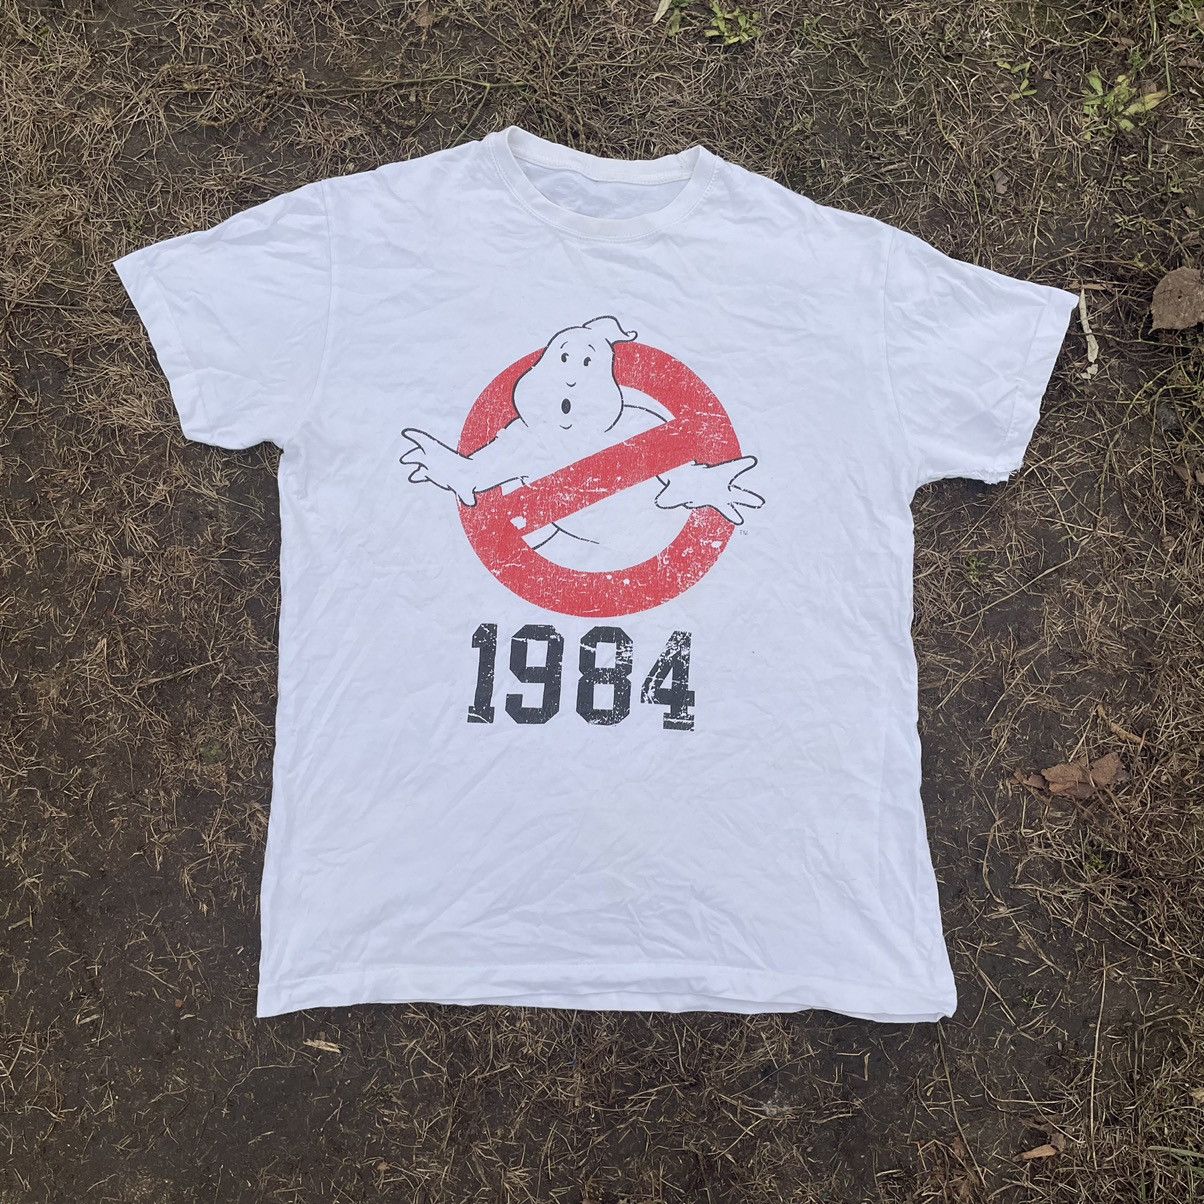 Pre-owned Band Tees X Vintage Y2k Ghostbusters Ghost Face Horror Promo Tee 90's In White